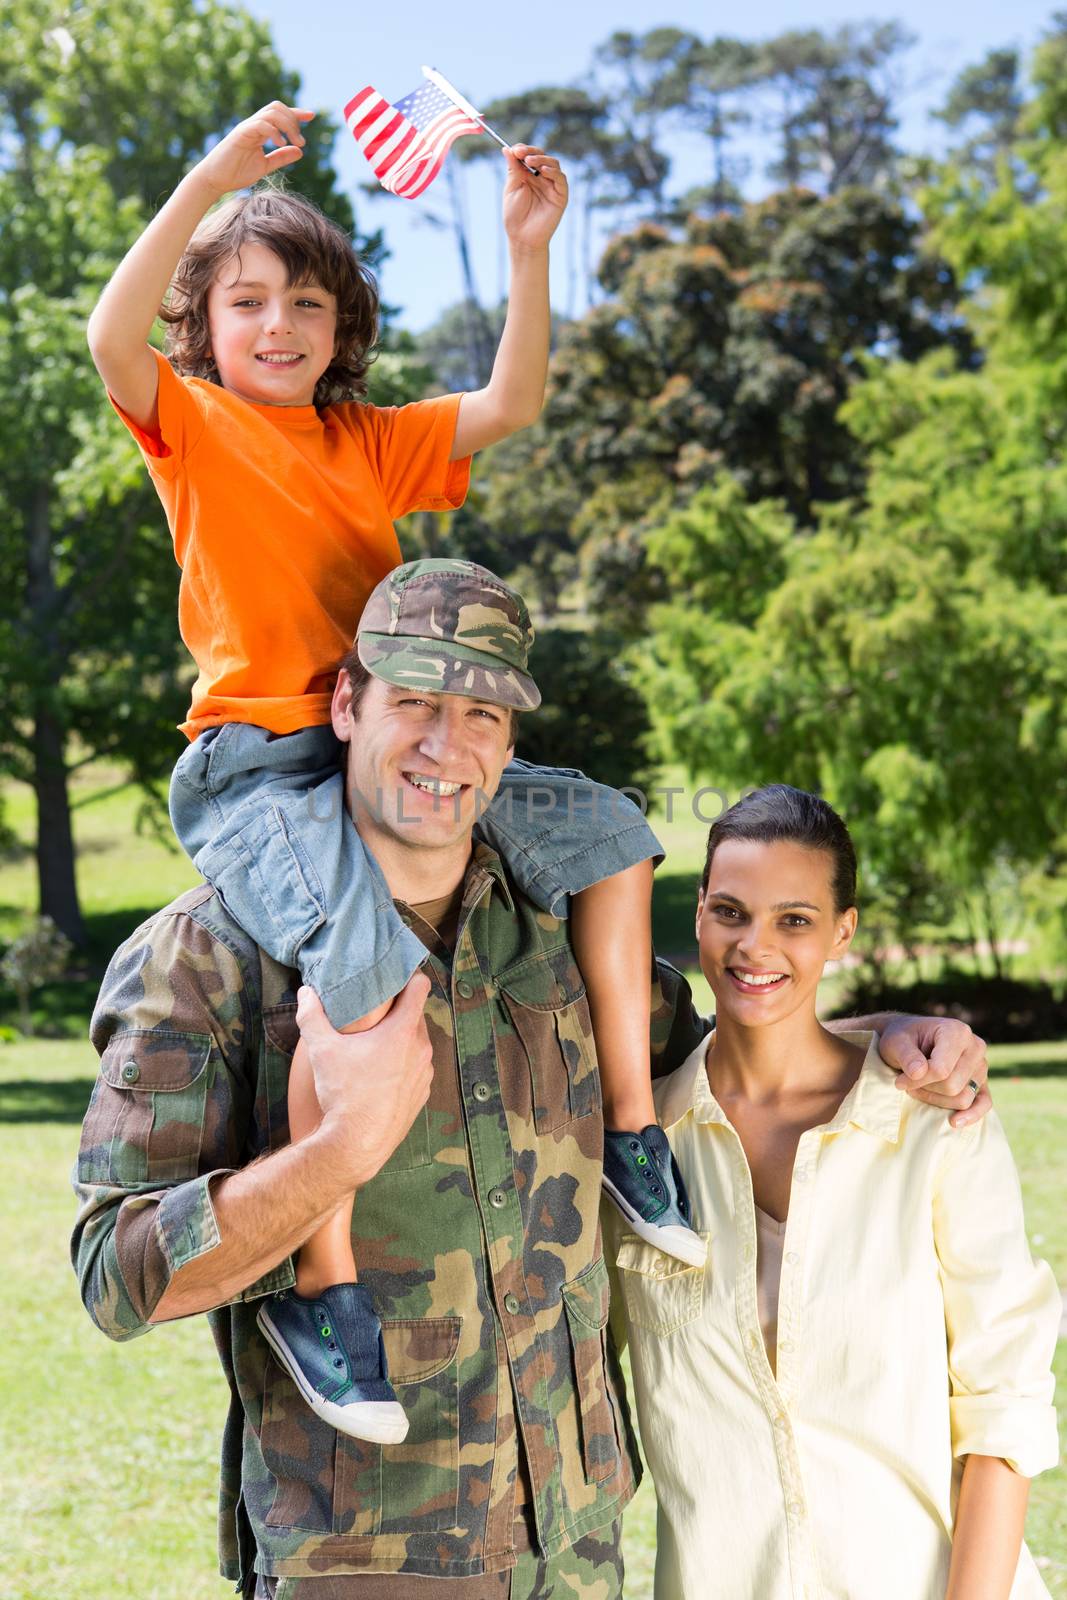 American soldier reunited with family by Wavebreakmedia